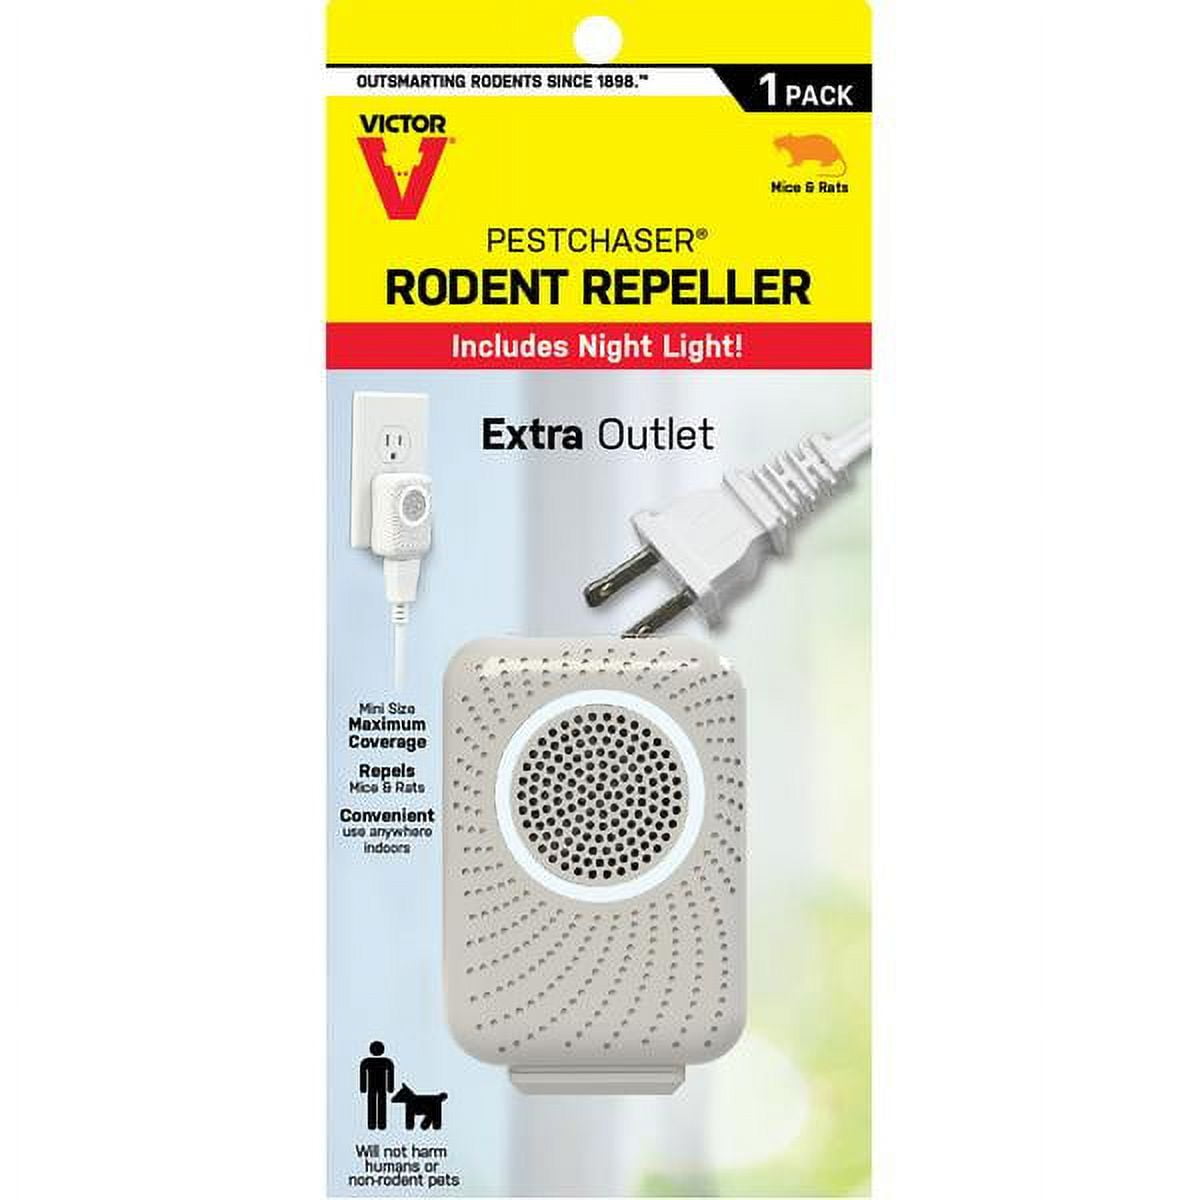 Victor PestChaser Rodent Repeller with Nightlight and Extra Outlet